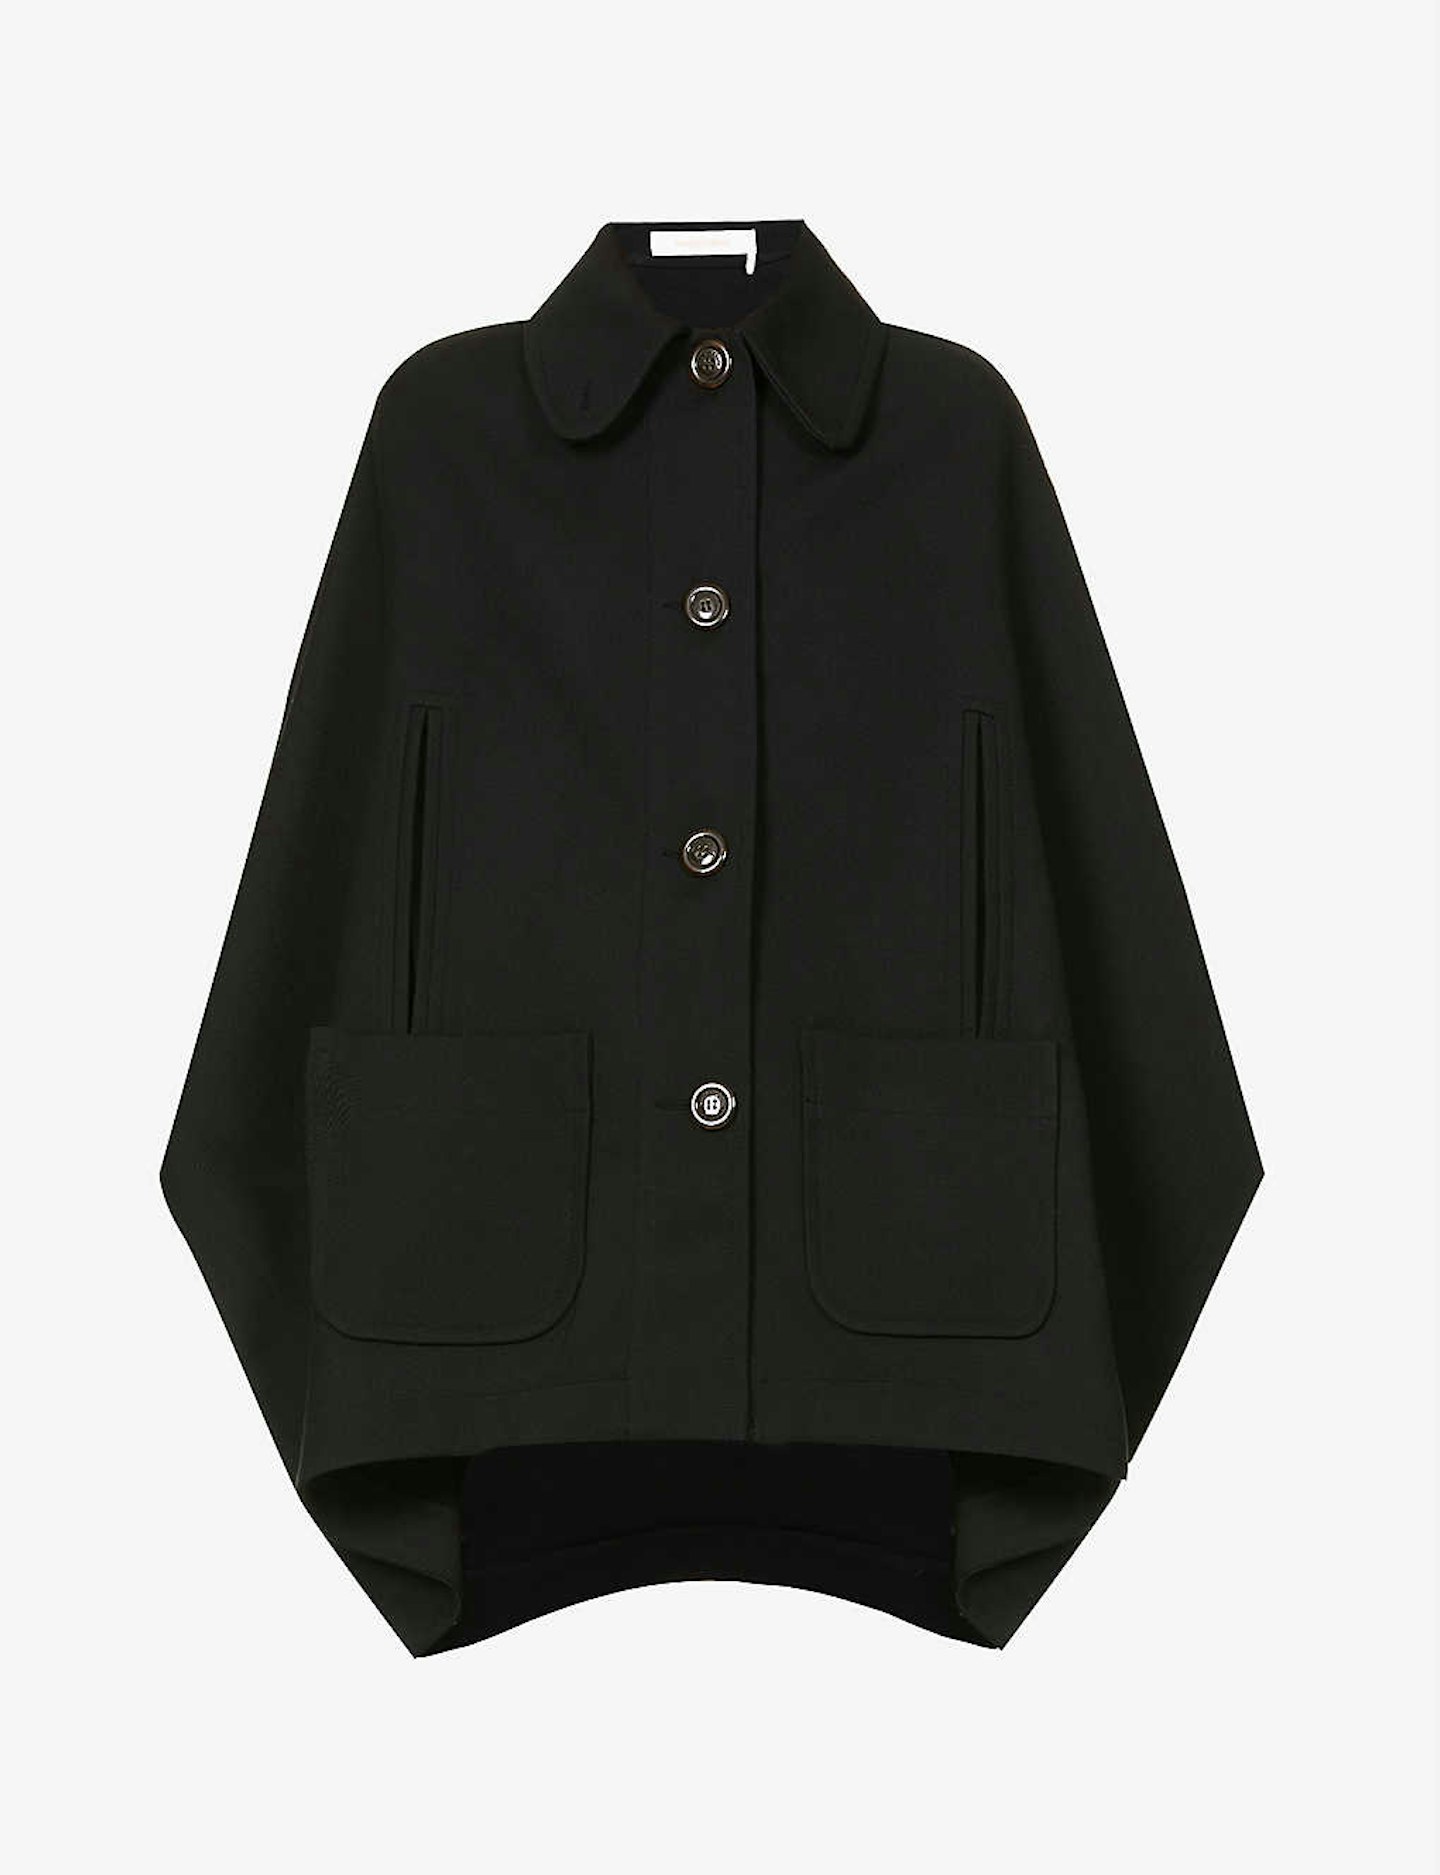 See By Chloe, Button Down Cape, £655 at Selfridges